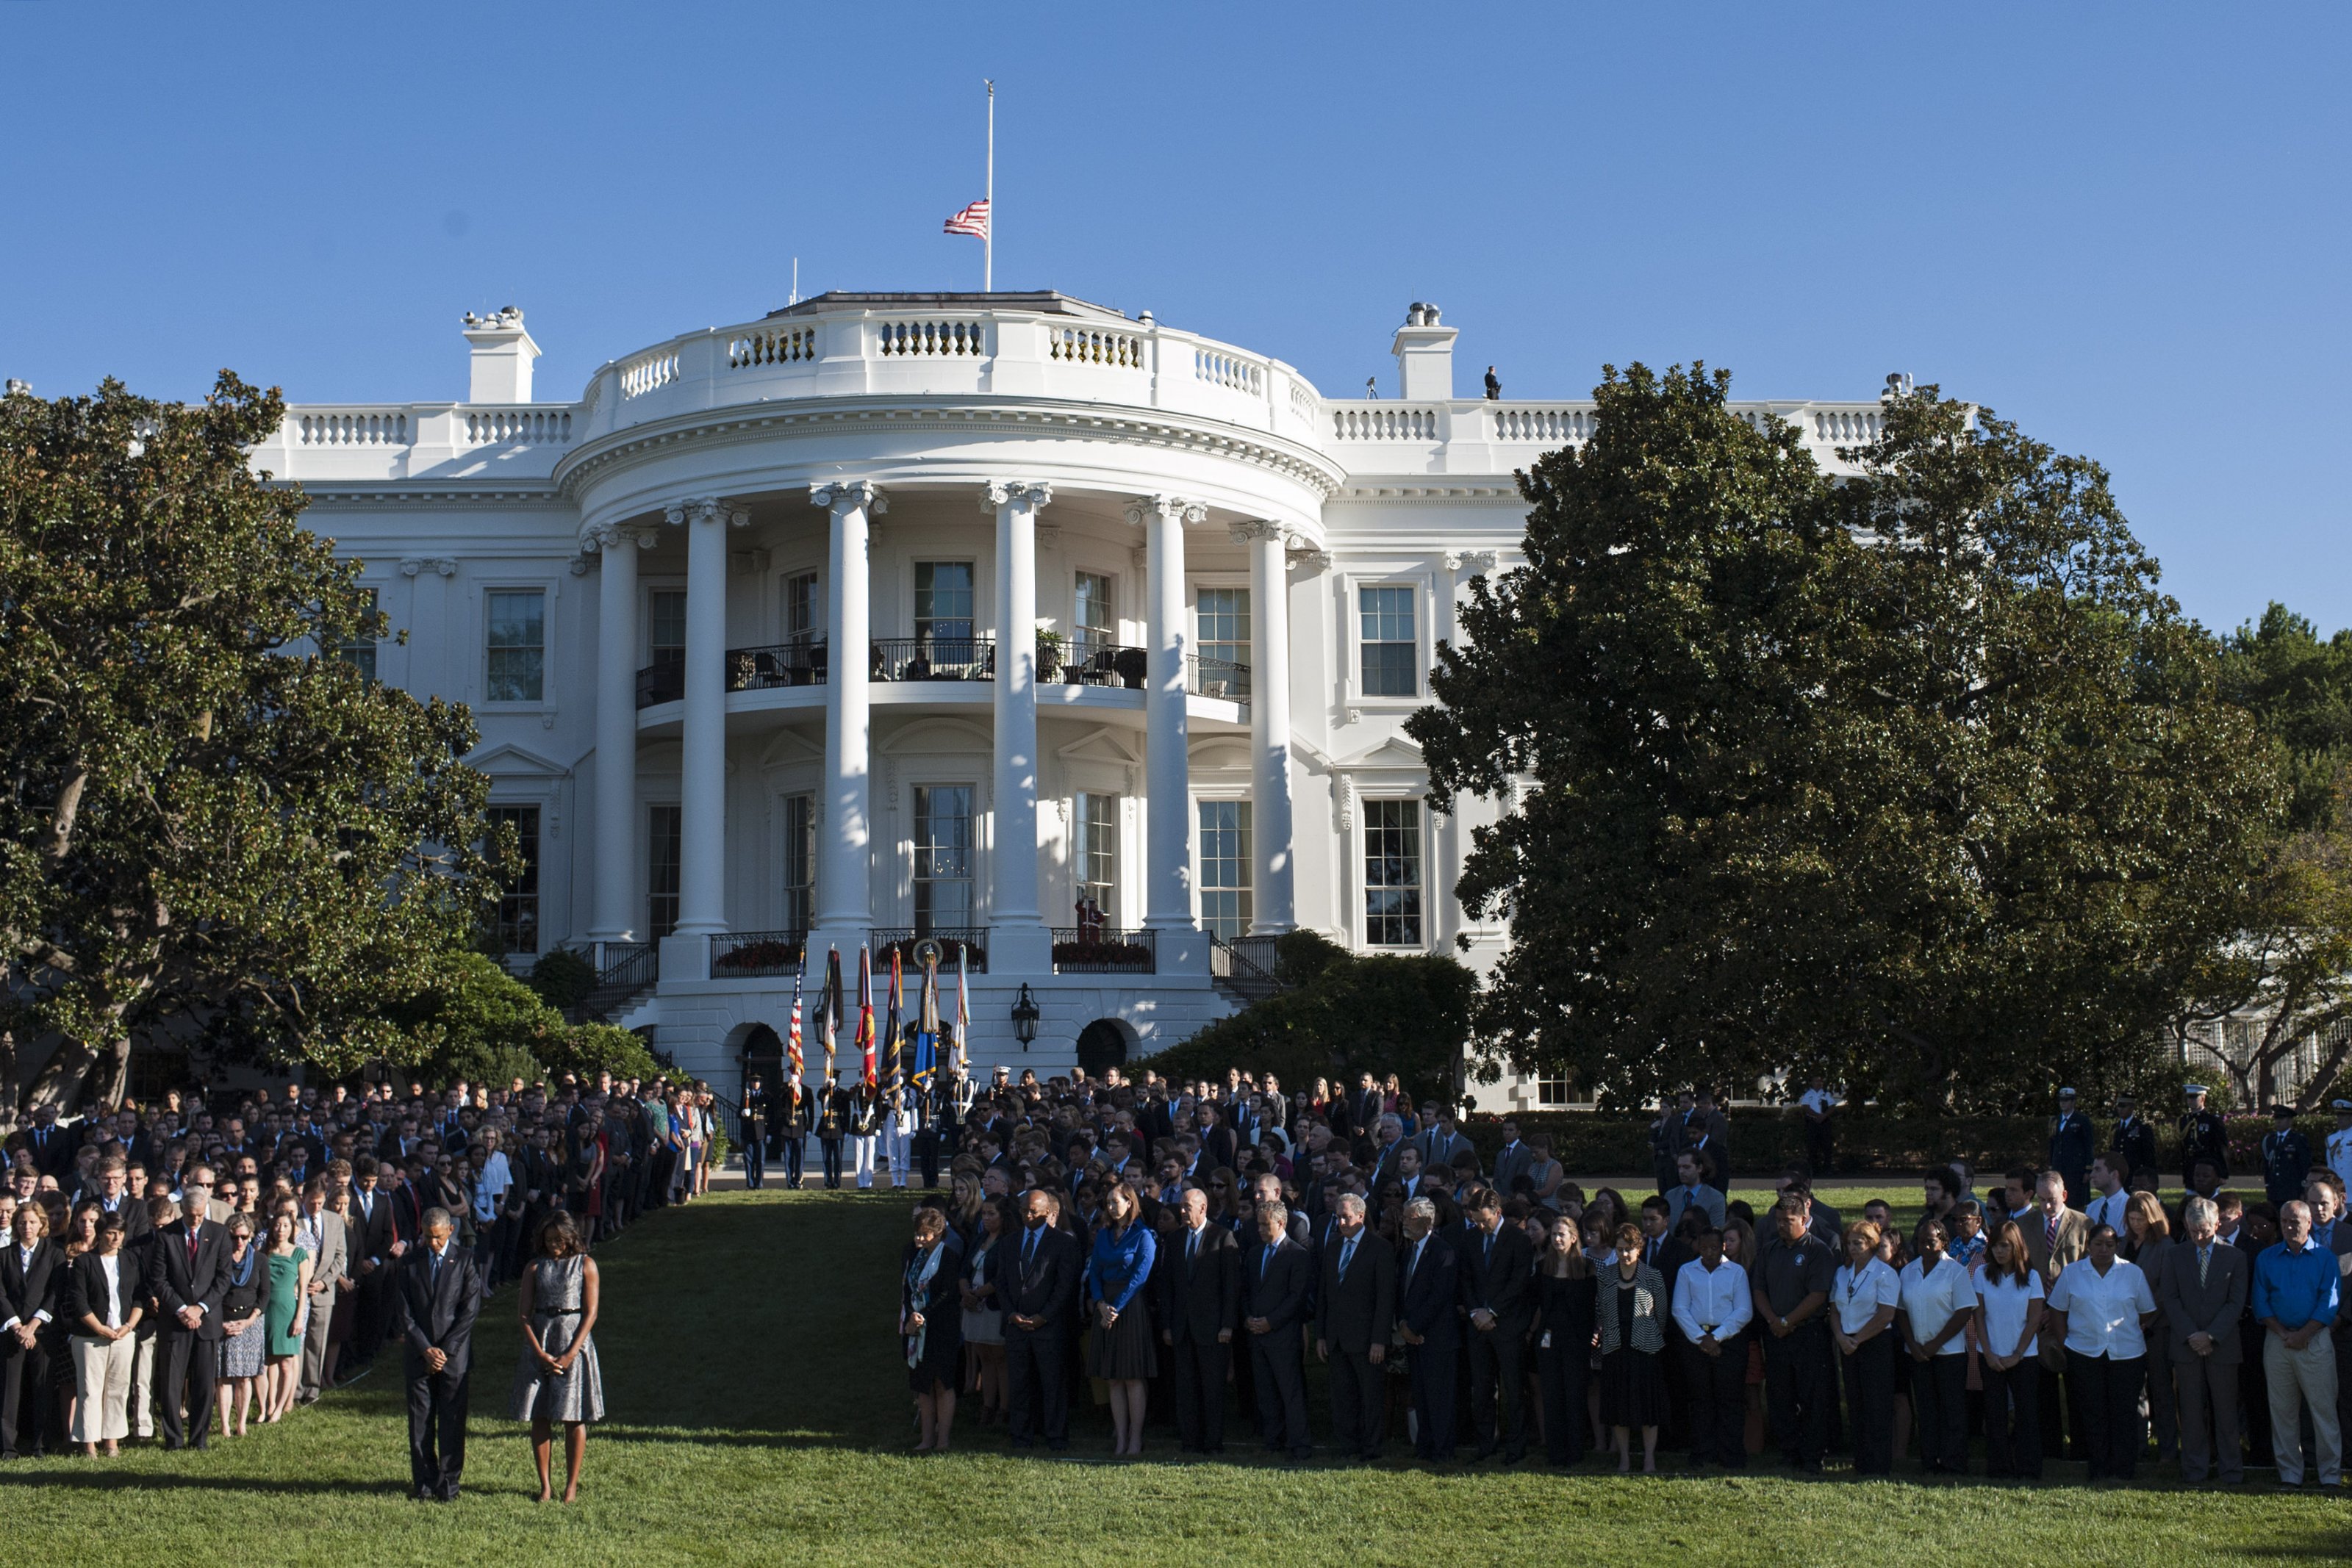 President Barack Obama and First Lady Michelle Obama, joined by White House staff, participate in a moment of silence on the 14th anniversary of the September 11 terrorist attacks on the United States, at the White House in Washington, D.C. on September 11, 2015. Photo by Kevin Dietsch/UPI/ABACAPRESS.COM